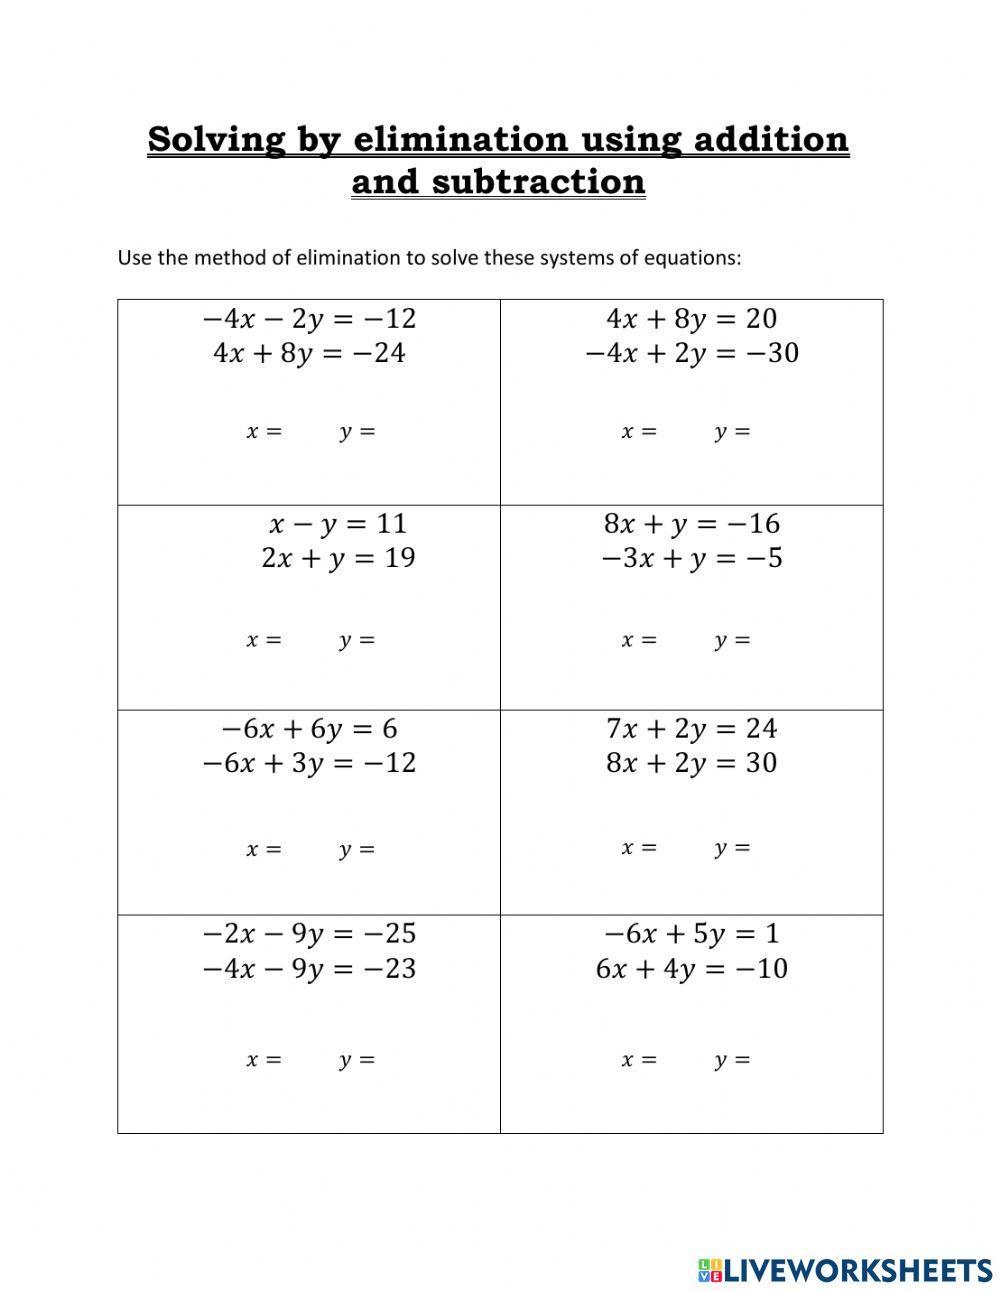 Elimination using addition and subtraction